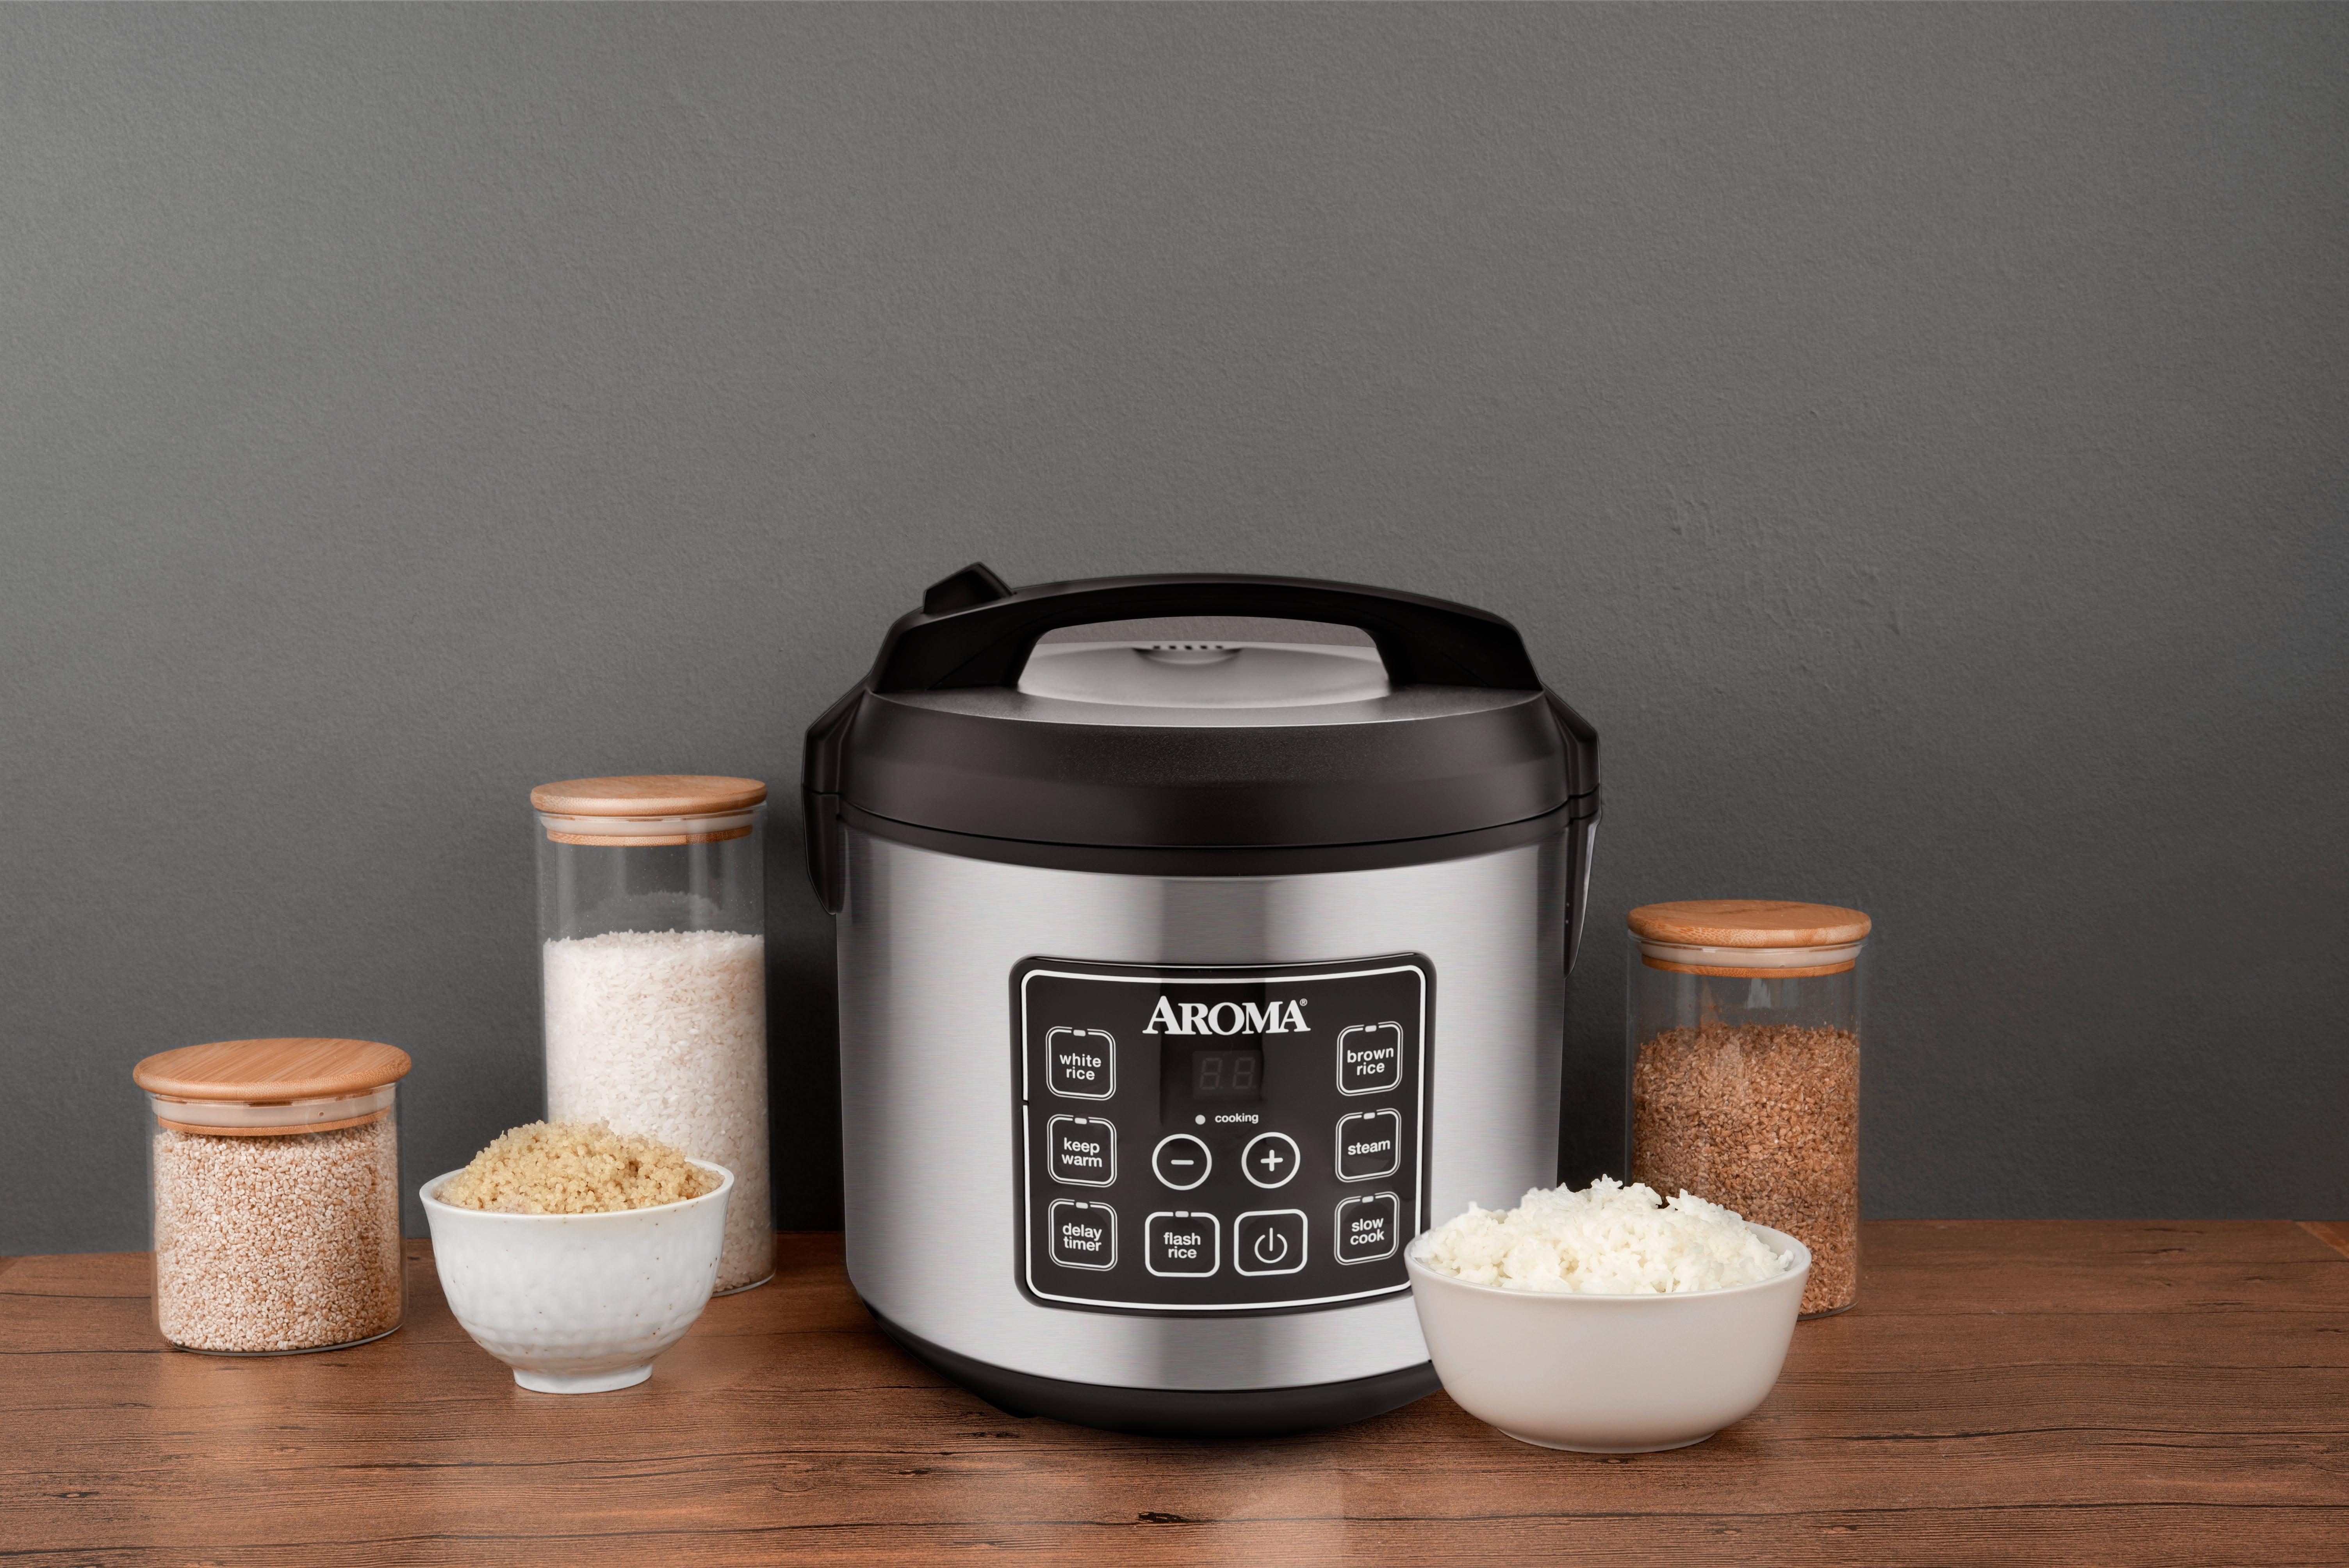 Aroma 20 Cups Programmable Residential Rice Cooker at